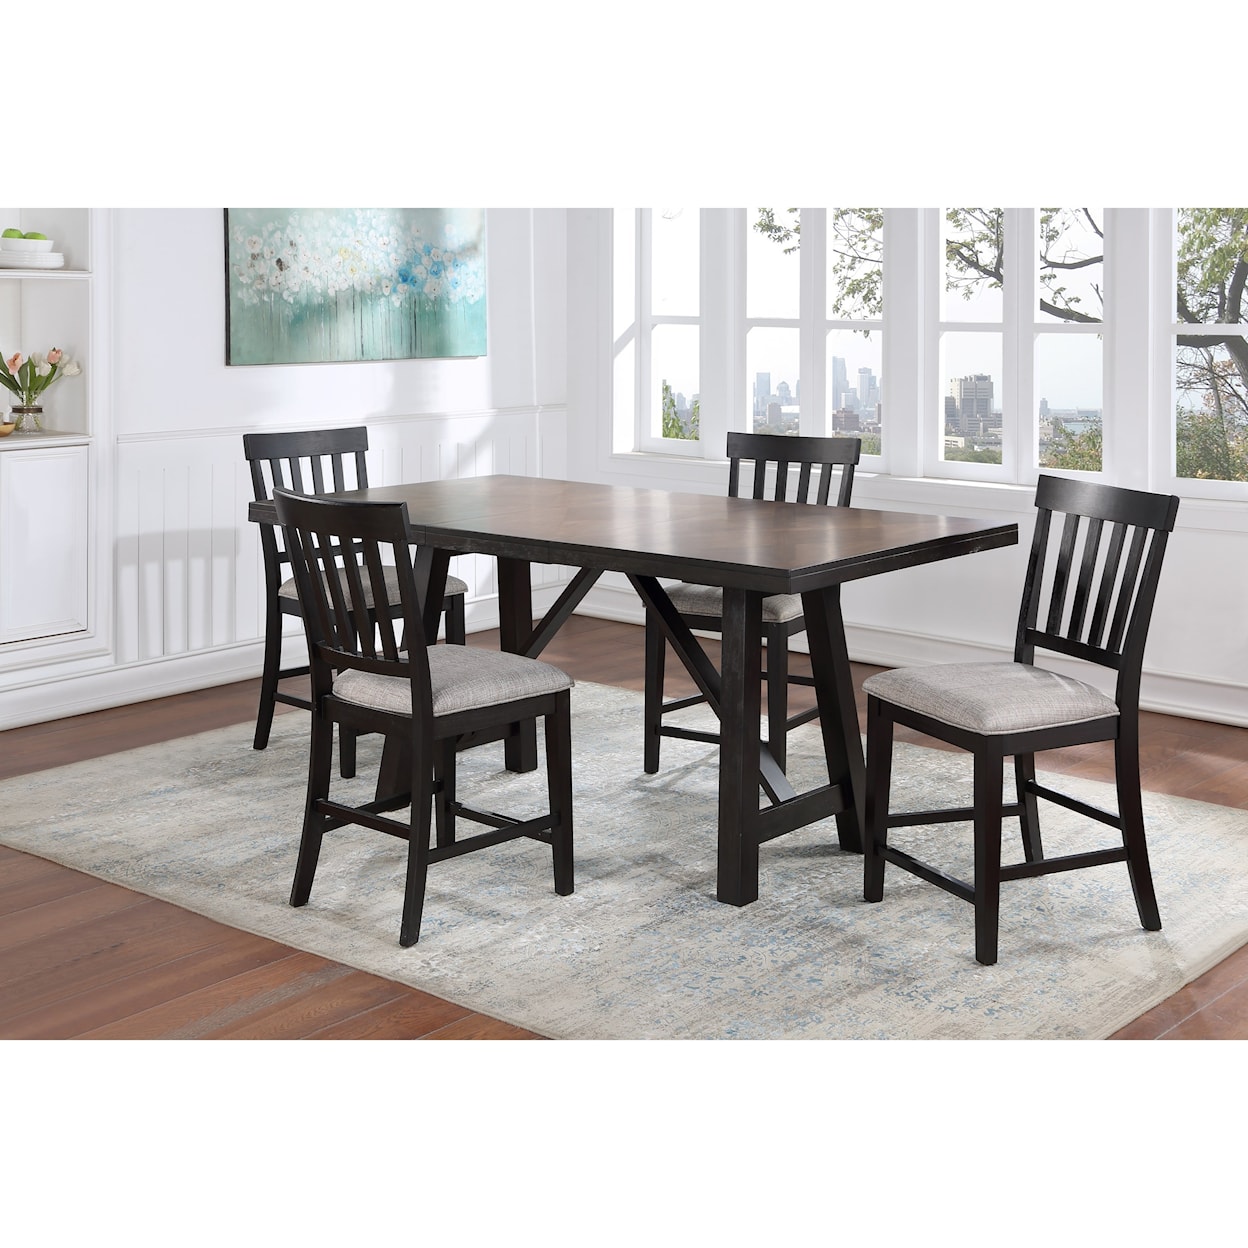 Prime Halle 5-Piece Table and Chair Set